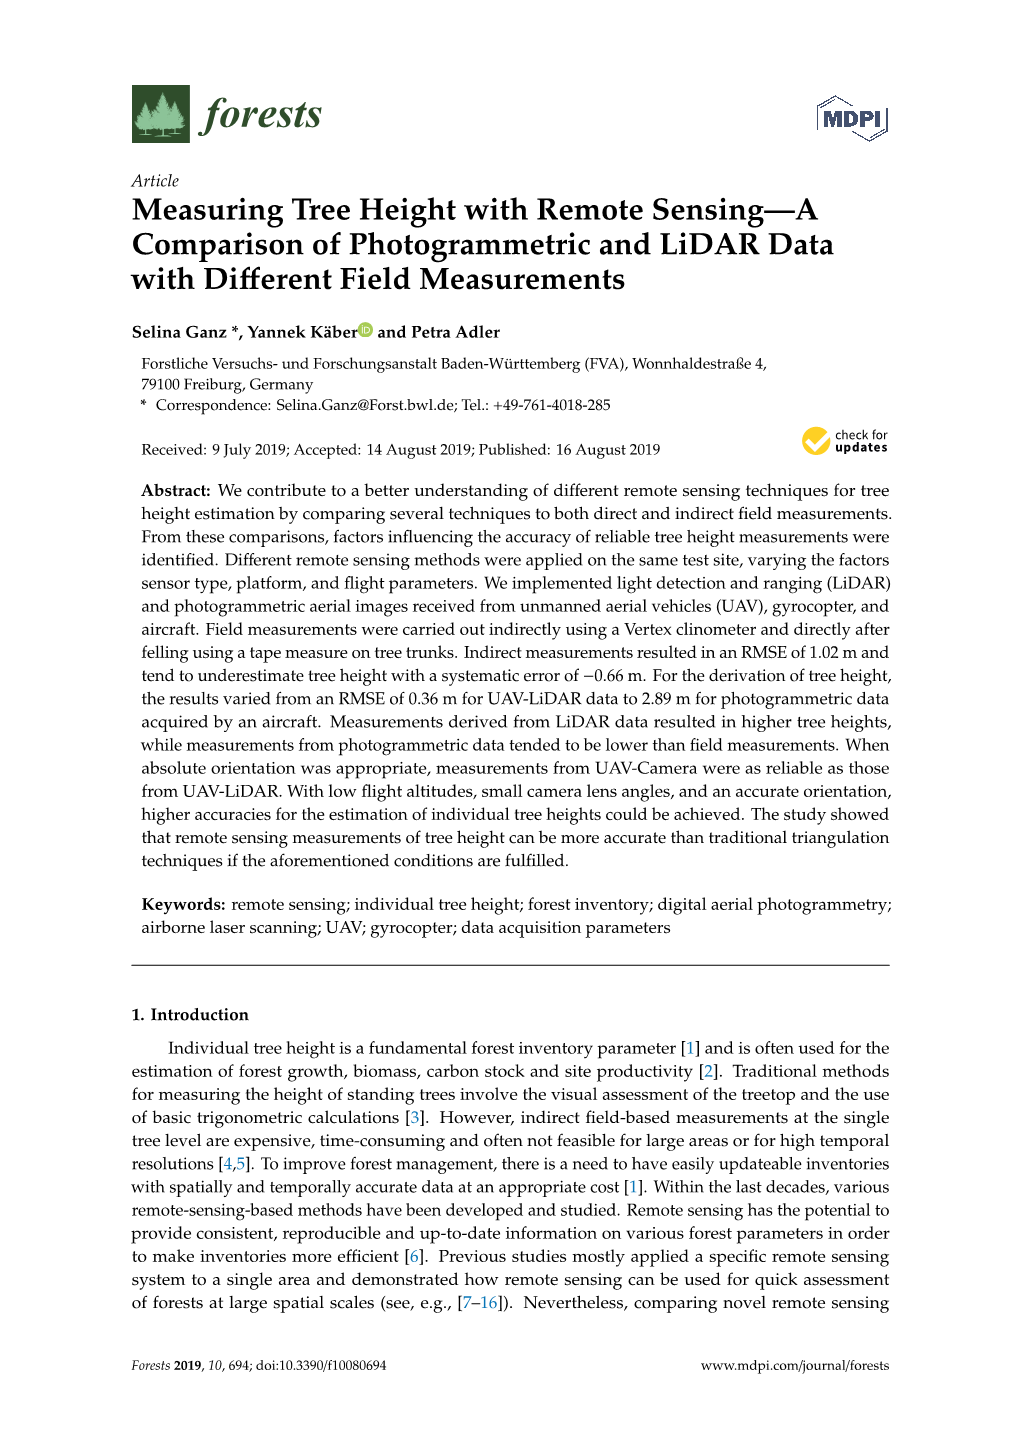 Measuring Tree Height with Remote Sensing—A Comparison of Photogrammetric and Lidar Data with Diﬀerent Field Measurements